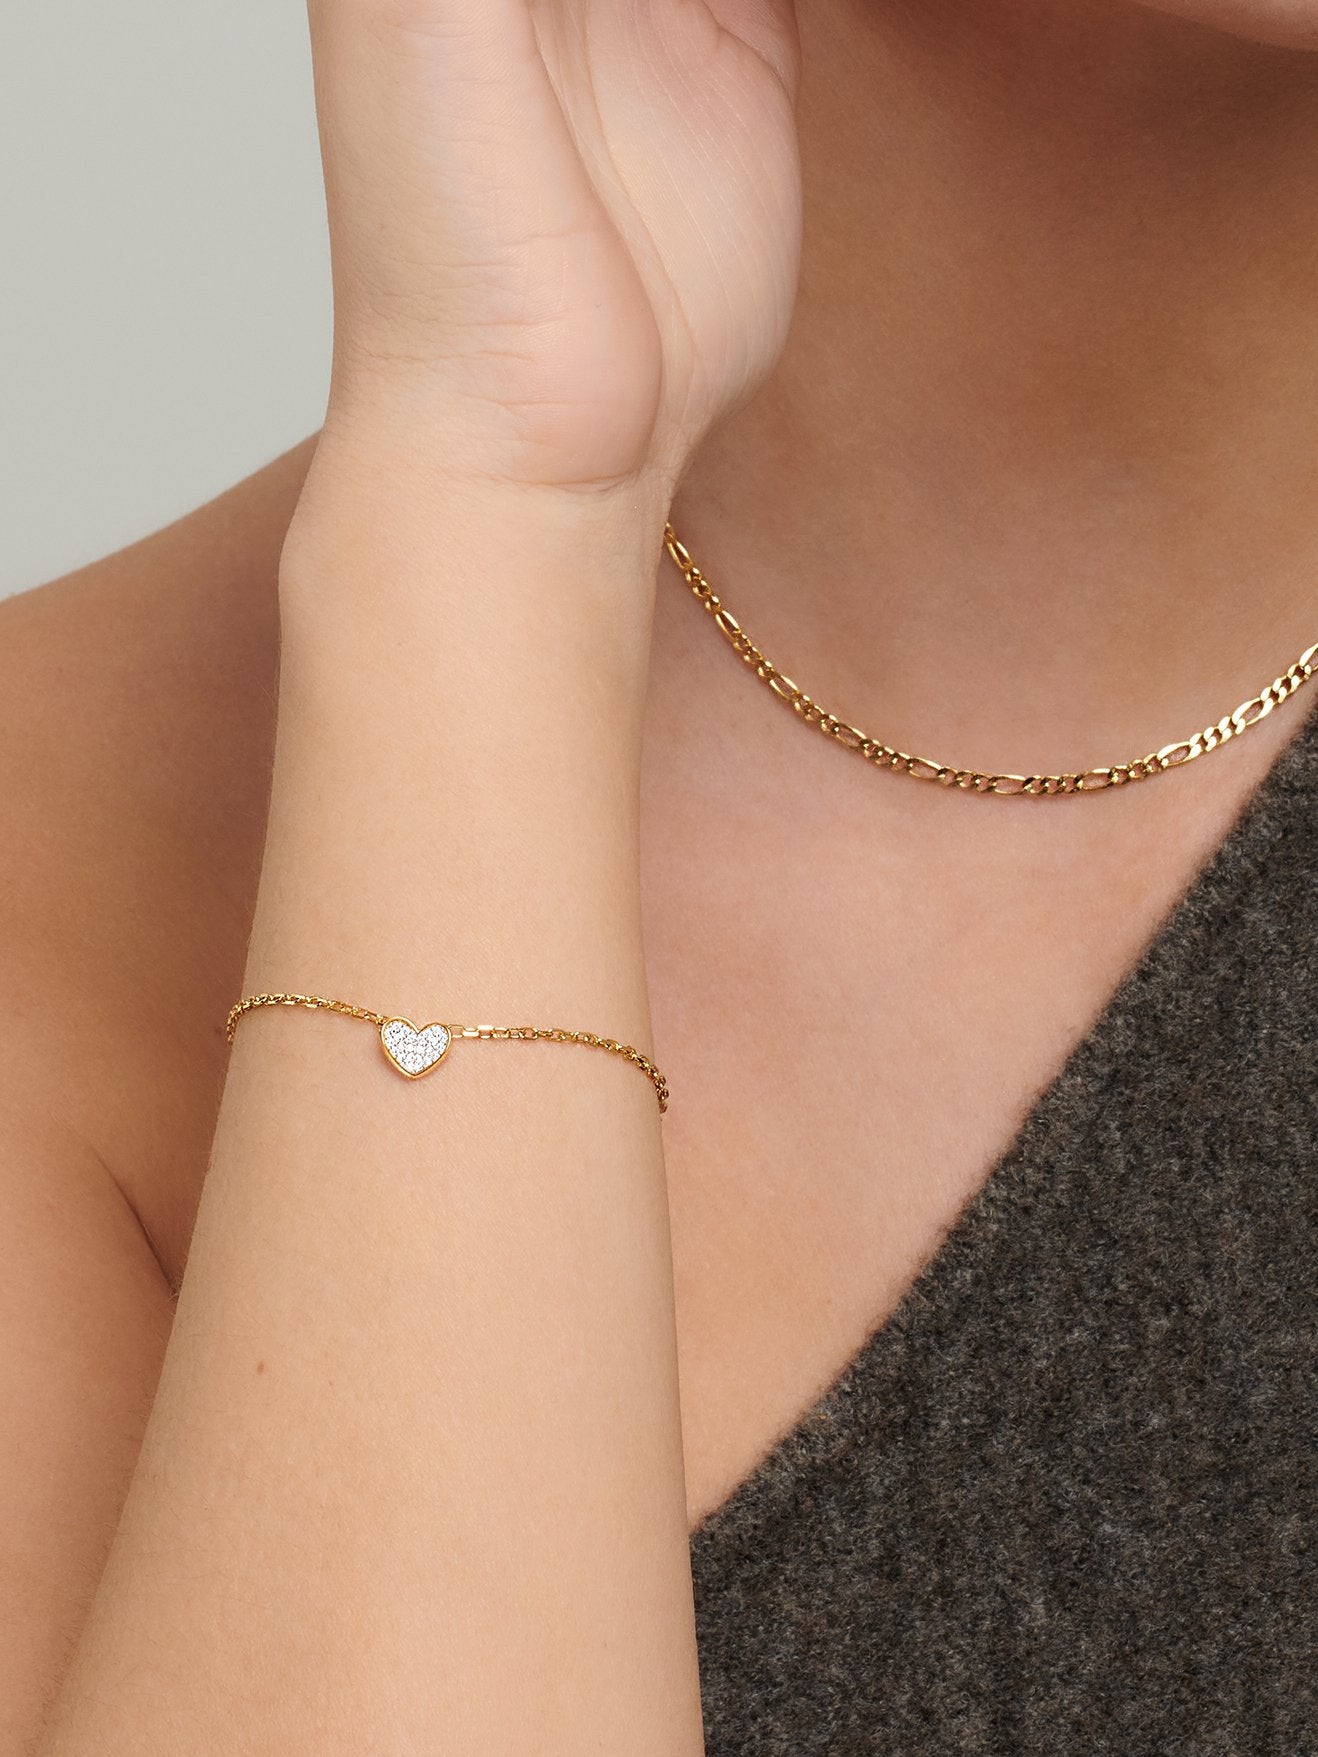 Gold Charm Bracelet with a small white heart.